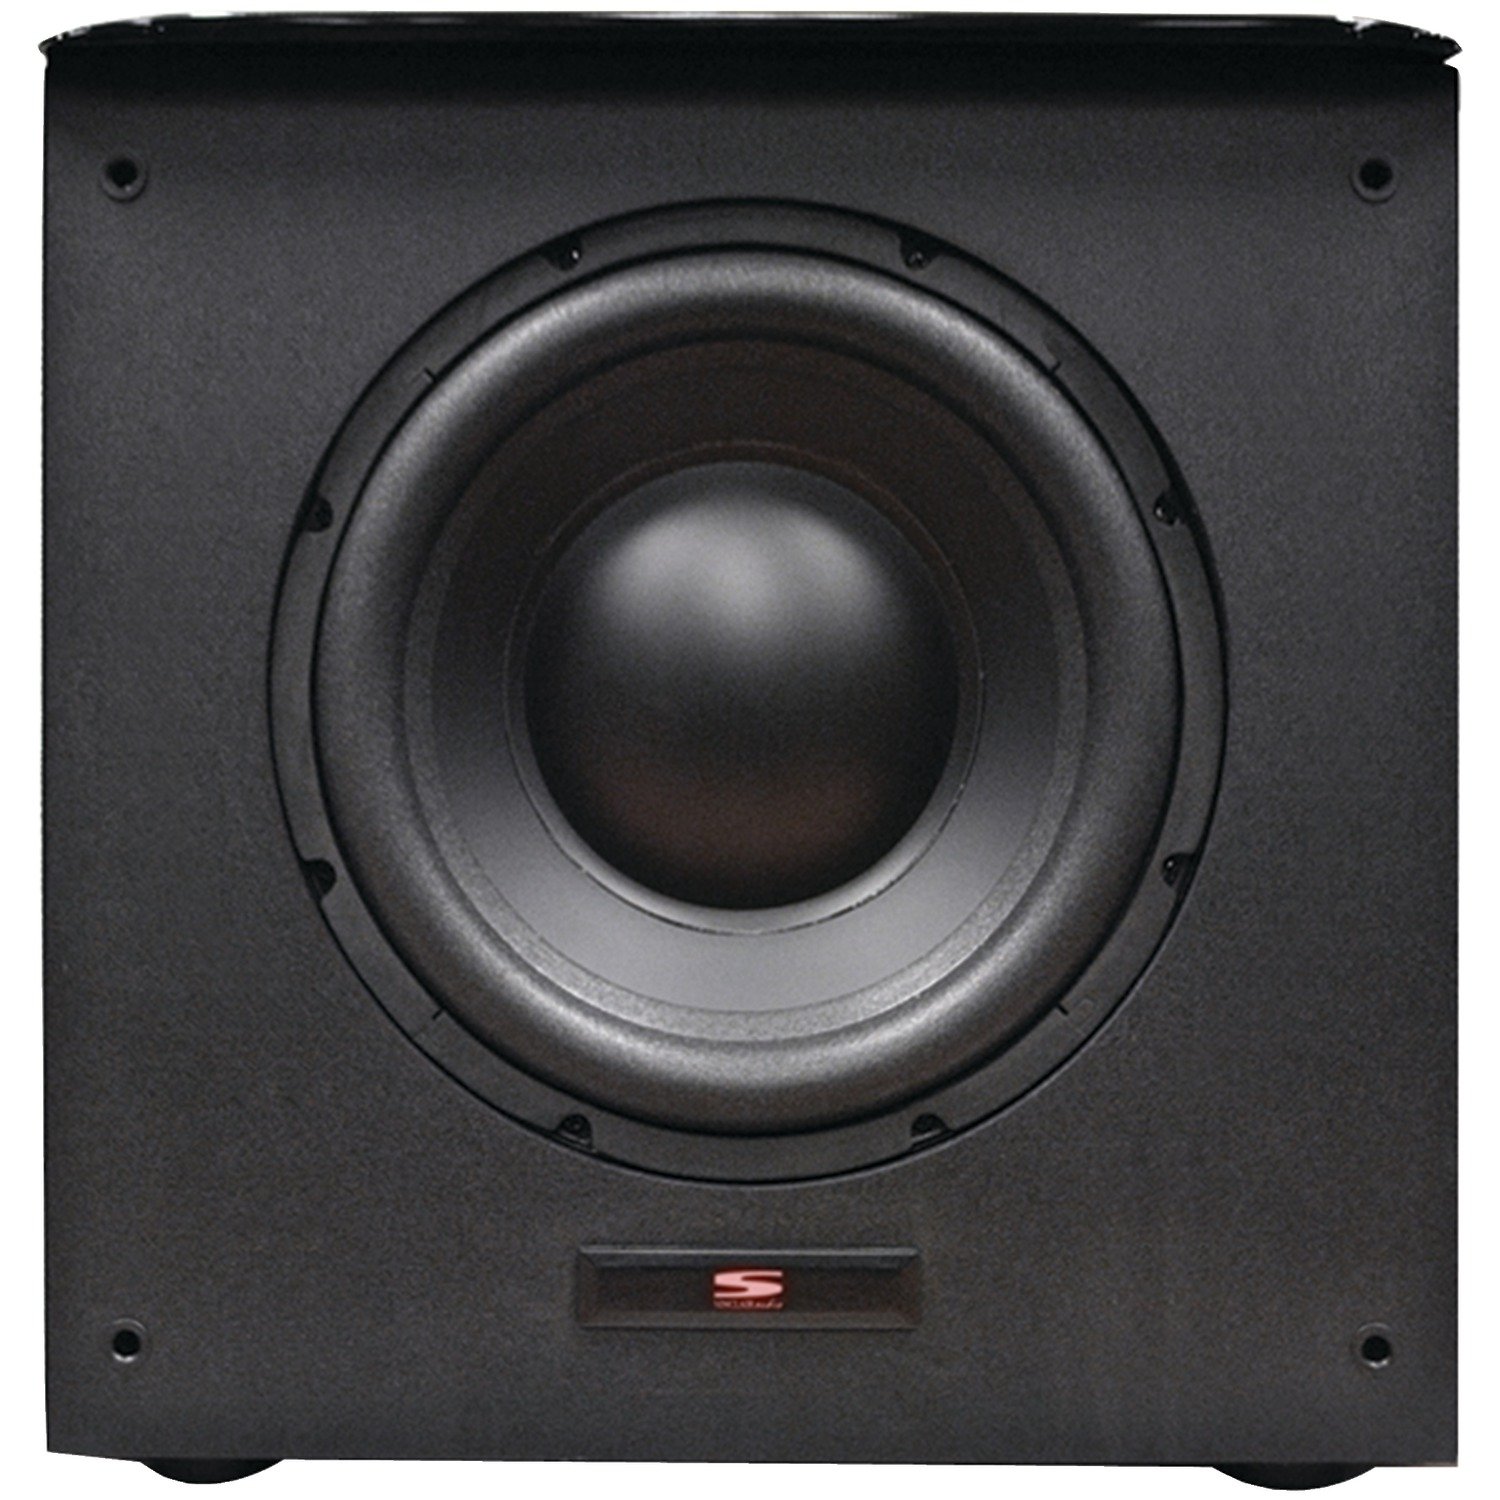 Sinclair Audio 8s 8" Powered Subwoofer - image 1 of 1